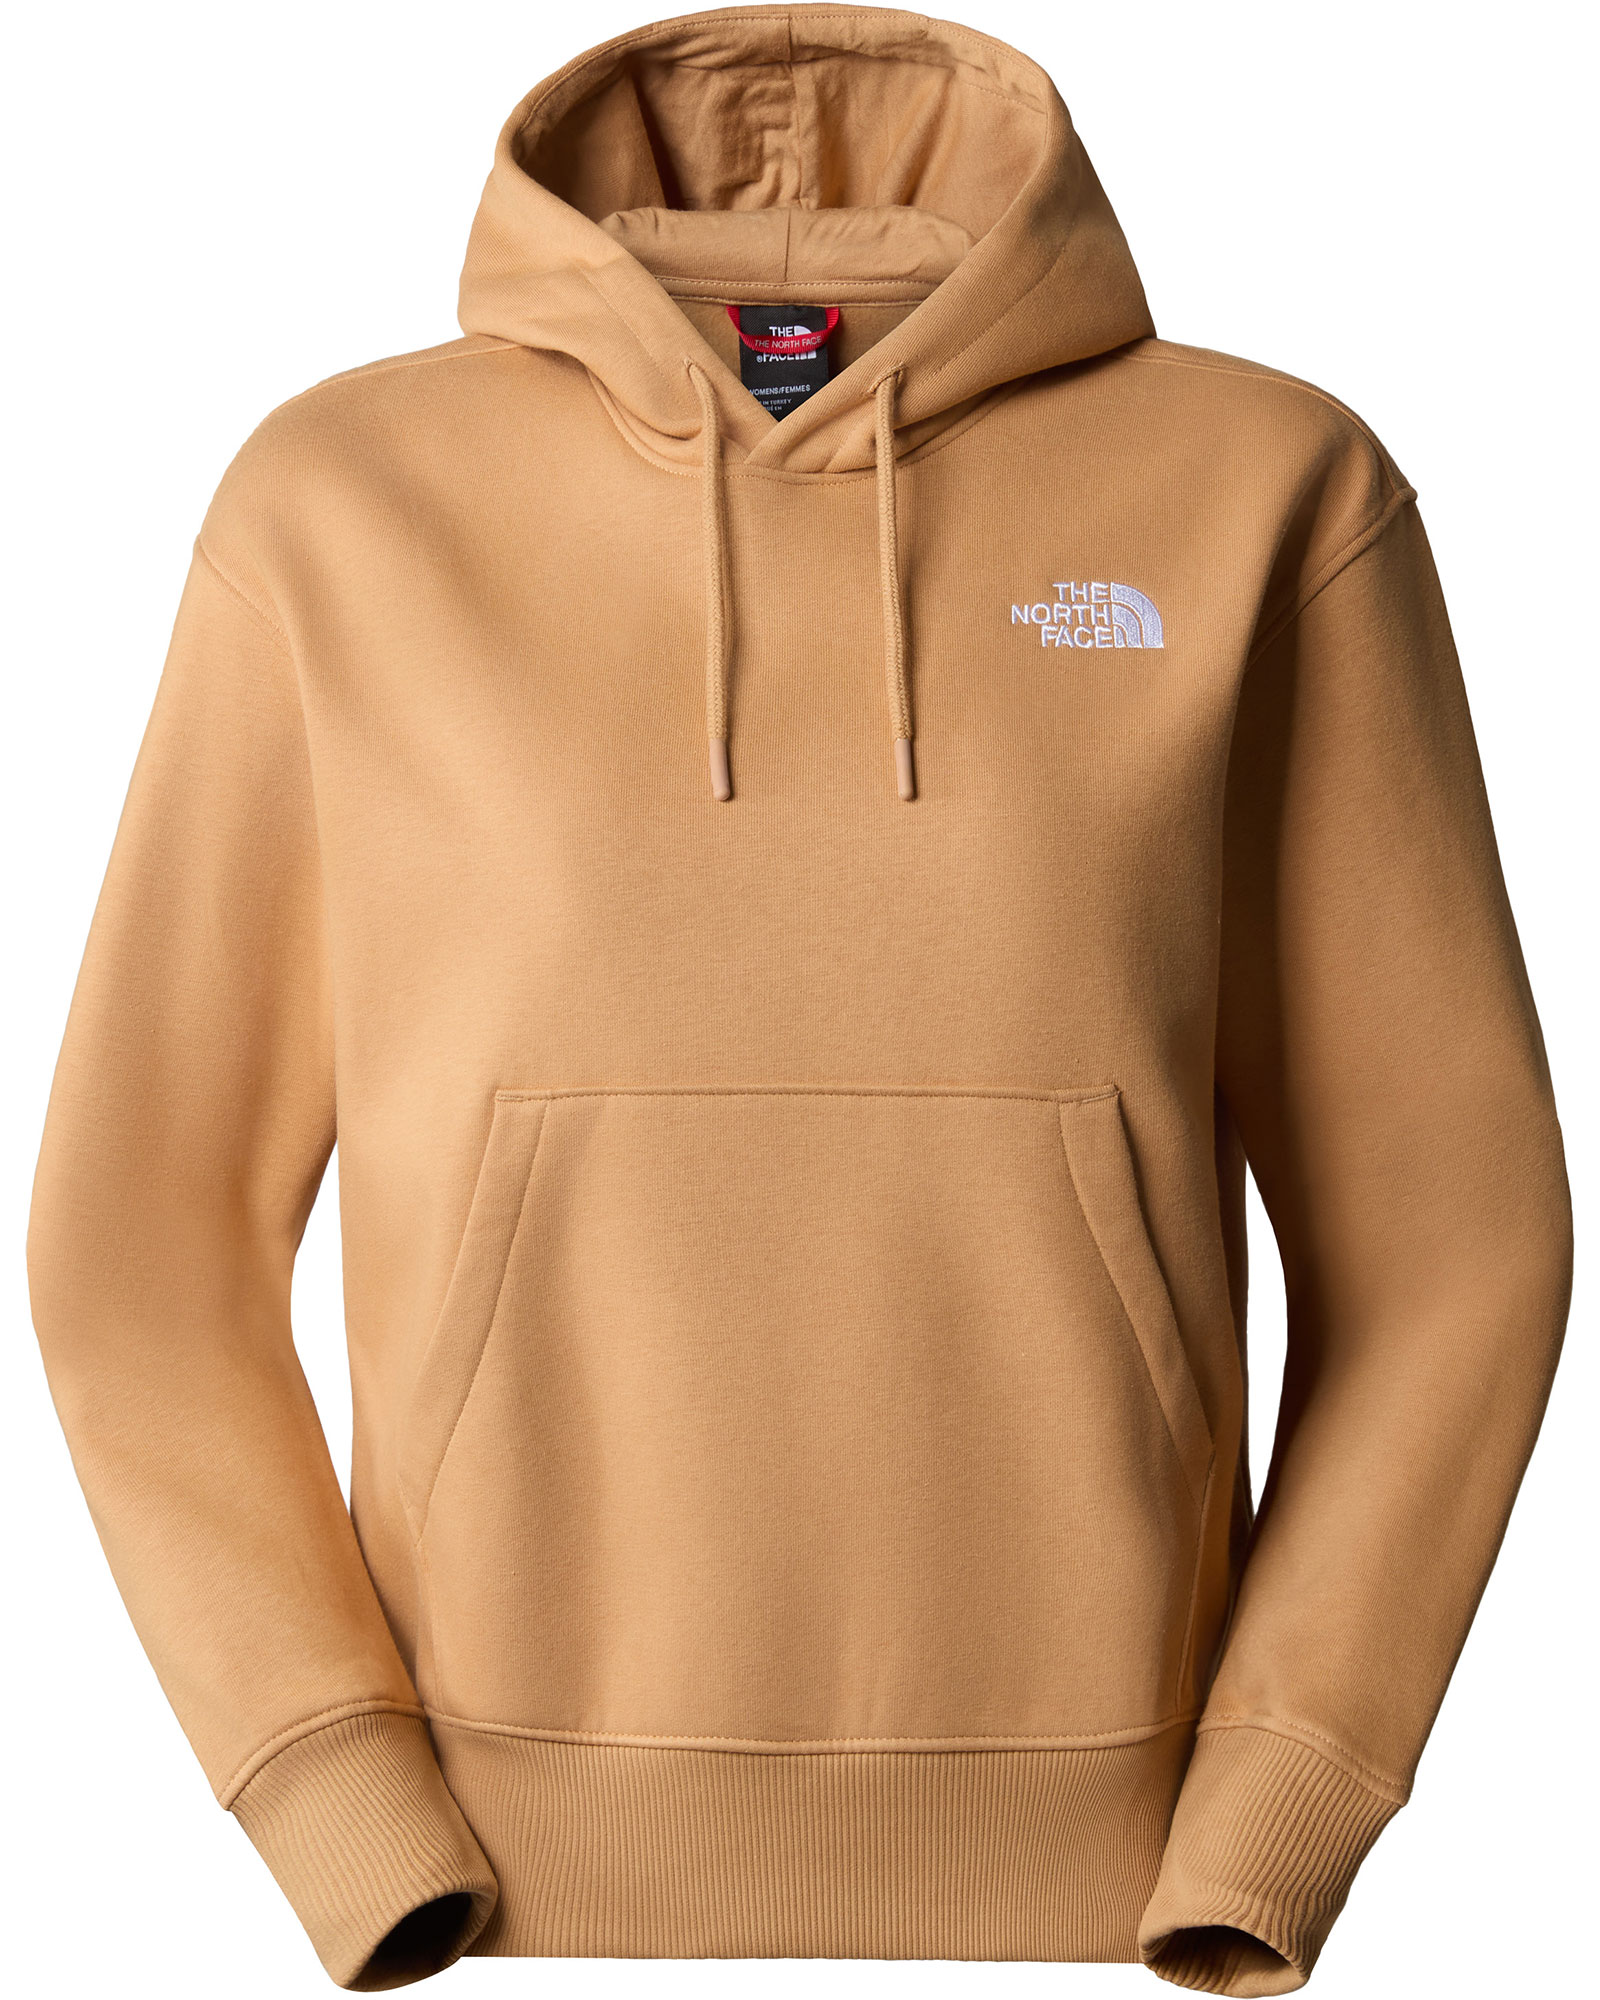 The North Face Women’s Essential Hoodie - Almond Butter M